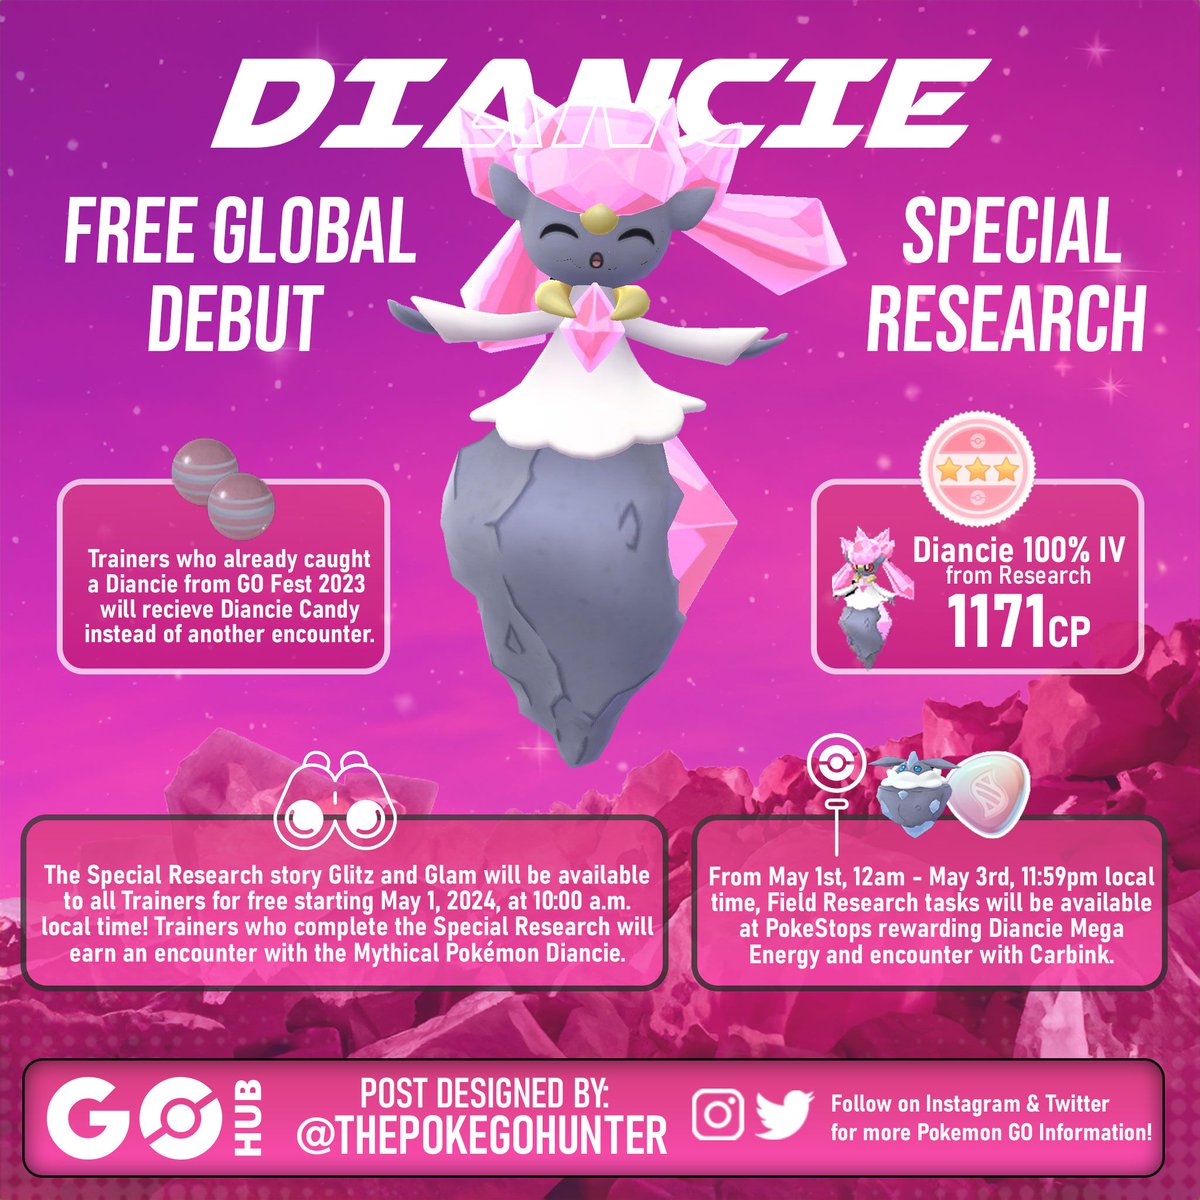 Pokémon GO’s Diancie is getting a worldwide release on May 1, 2024! Diancie is back, and releasing globally for all Trainers in a new special research story called Glitz and Glam! Full story here 👉 pokemongohub.net/post/event/dia… 📅 May 1, 2024 ⭐ Diancie's global debut #Pokemon